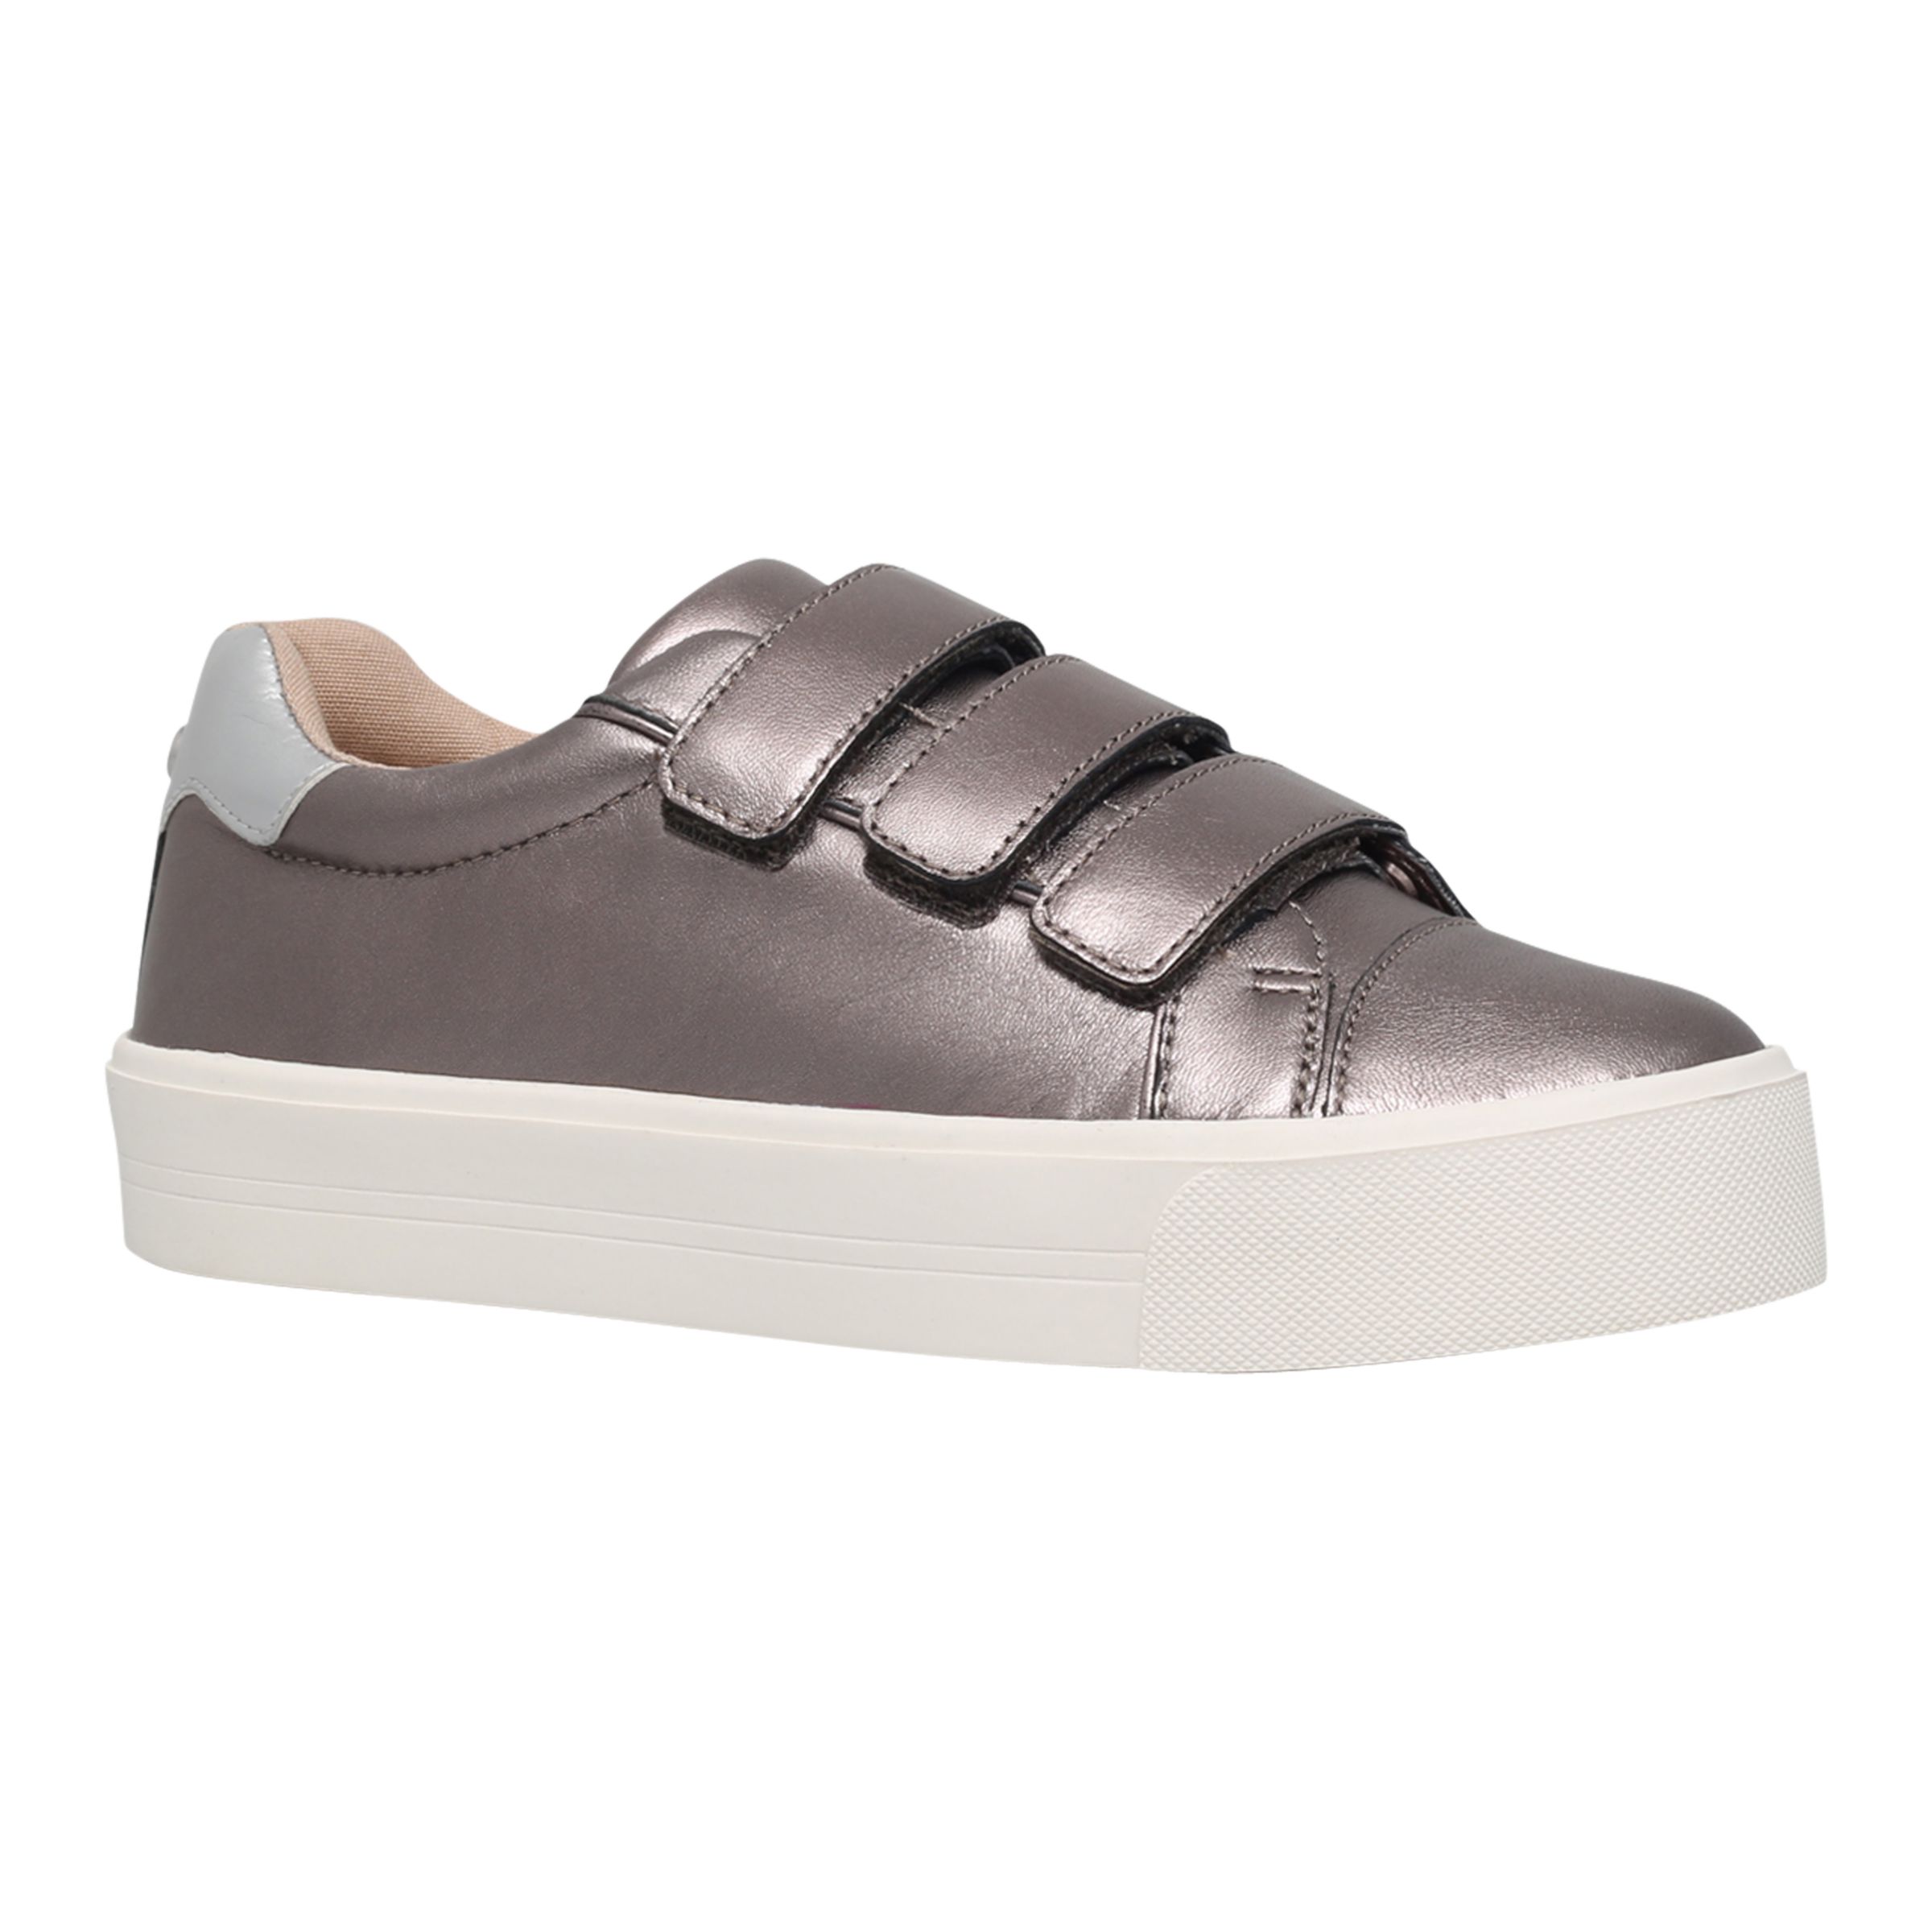 Carvela Lily Leather Sports Shoes, Pewter, 6